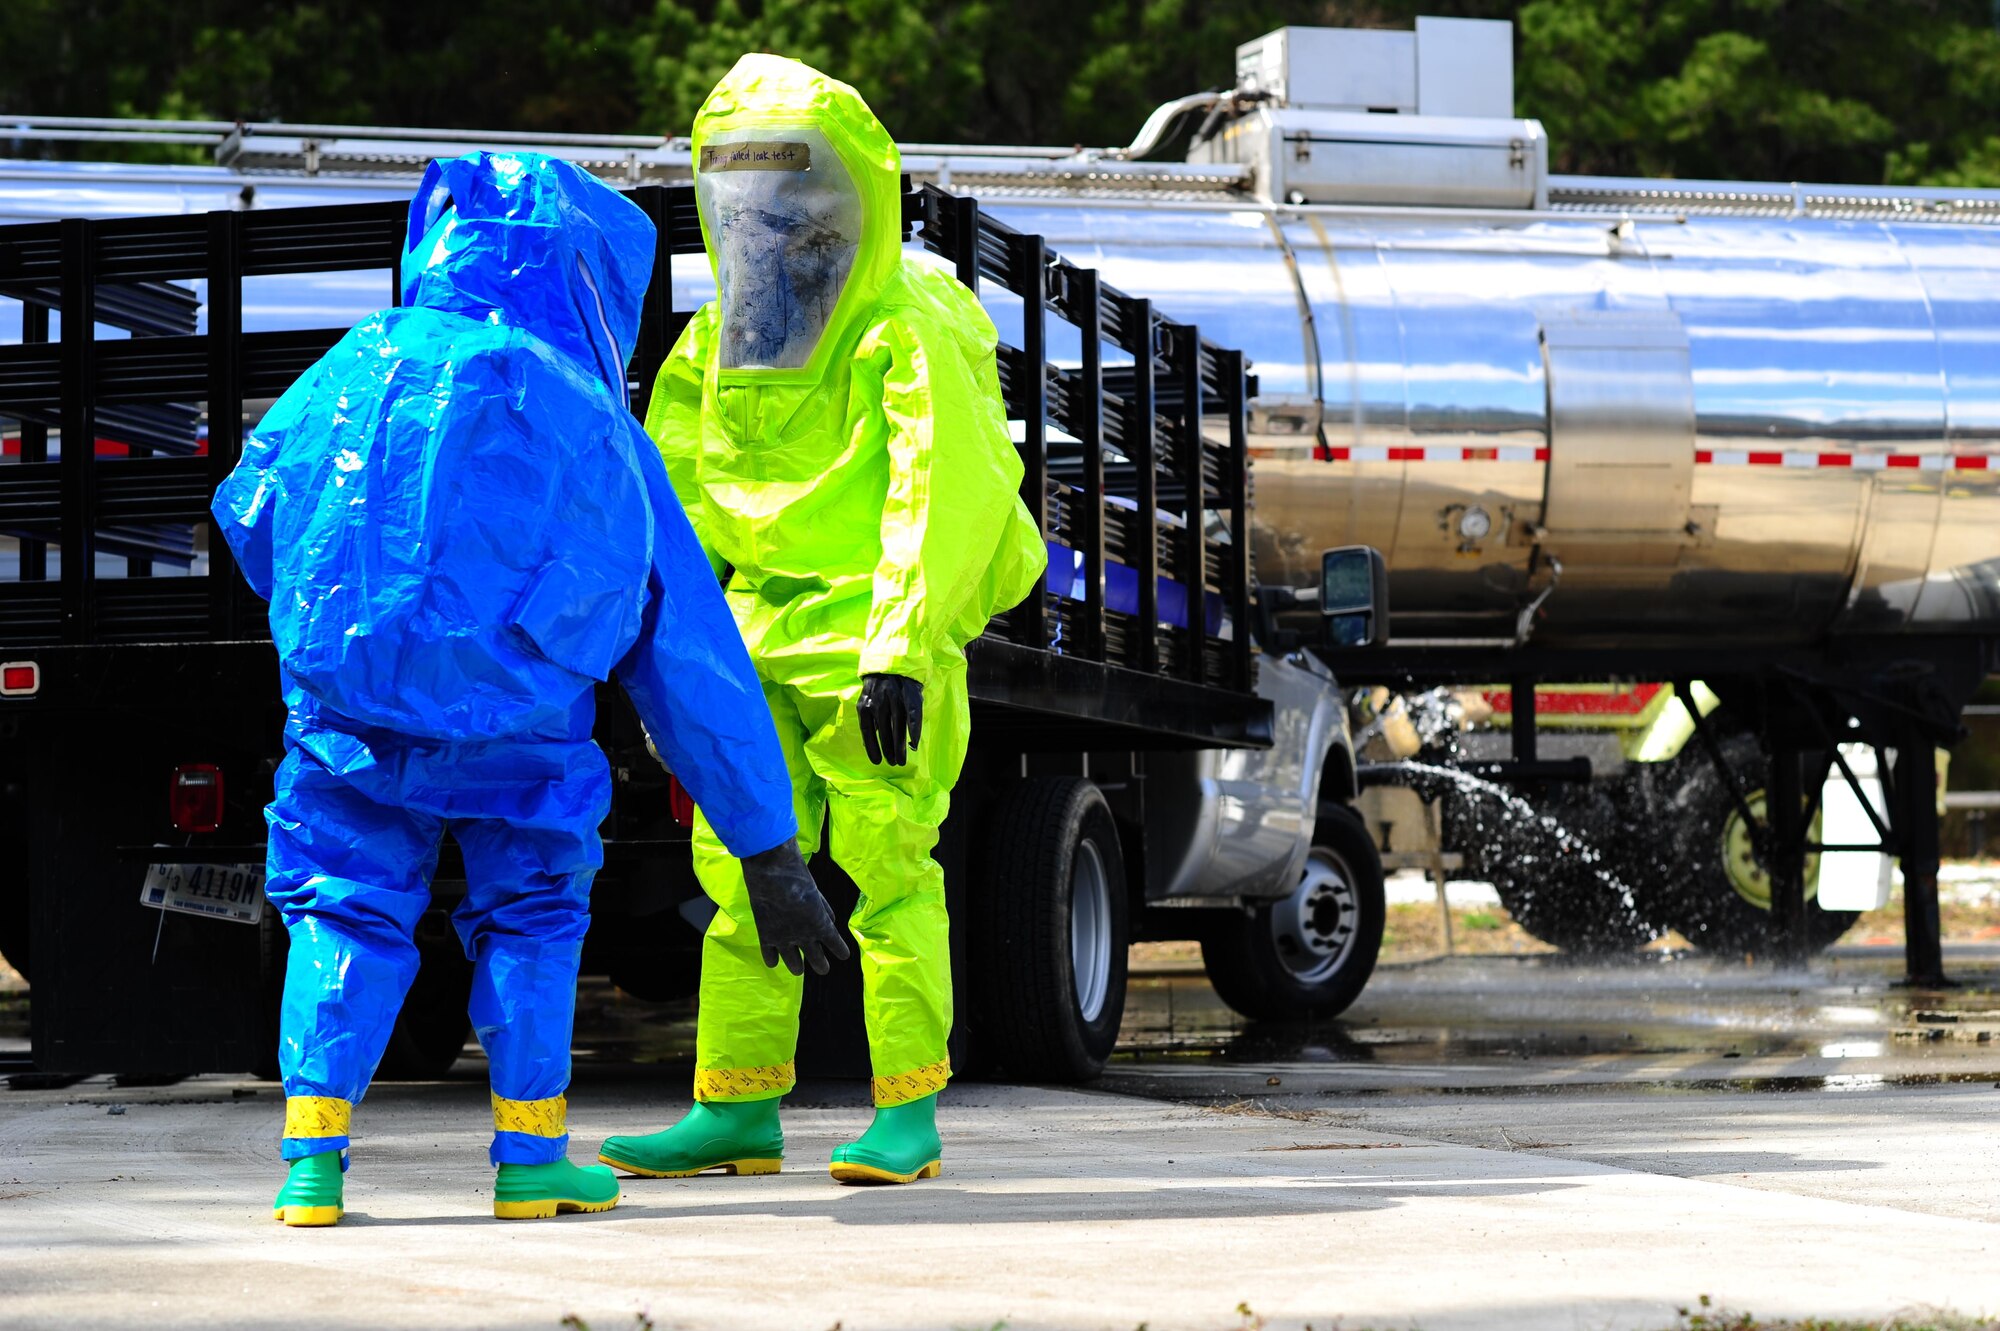 Airmen from the 315th Civil Engineering Flight conduct an exercise at their training facility at Joint Base Charleston, S.C., March 5, 2016. Members faced a scenario that required the cooperation between their firefighters, emergency management and explosive ordinance device units in order to develop a safe solution, while properly using their safety equipment. (U.S. Air Force photo by Senior Airman Jonathan Lane)